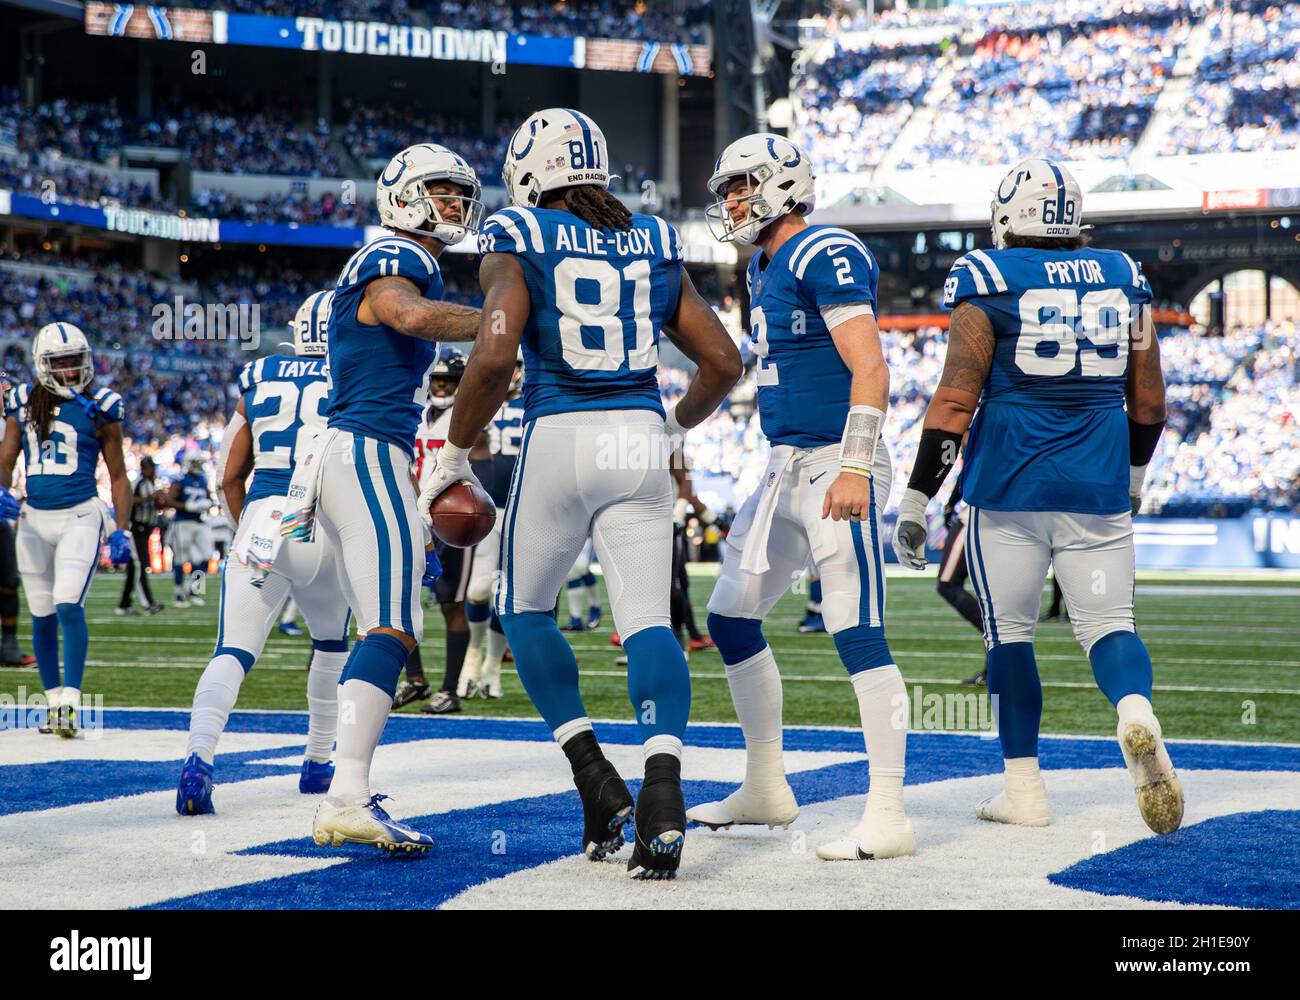 Indianapolis, Indiana, USA. 17th Oct, 2021. Indianapolis Colts tight end Mo Alie-Cox (81) and his teammates celebrate touchdown during NFL football game action between the Houston Texans and the Indianapolis Colts at Lucas Oil Stadium in Indianapolis, Indiana. Indianapolis defeated Houston 31-3. John Mersits/CSM/Alamy Live News Stock Photo